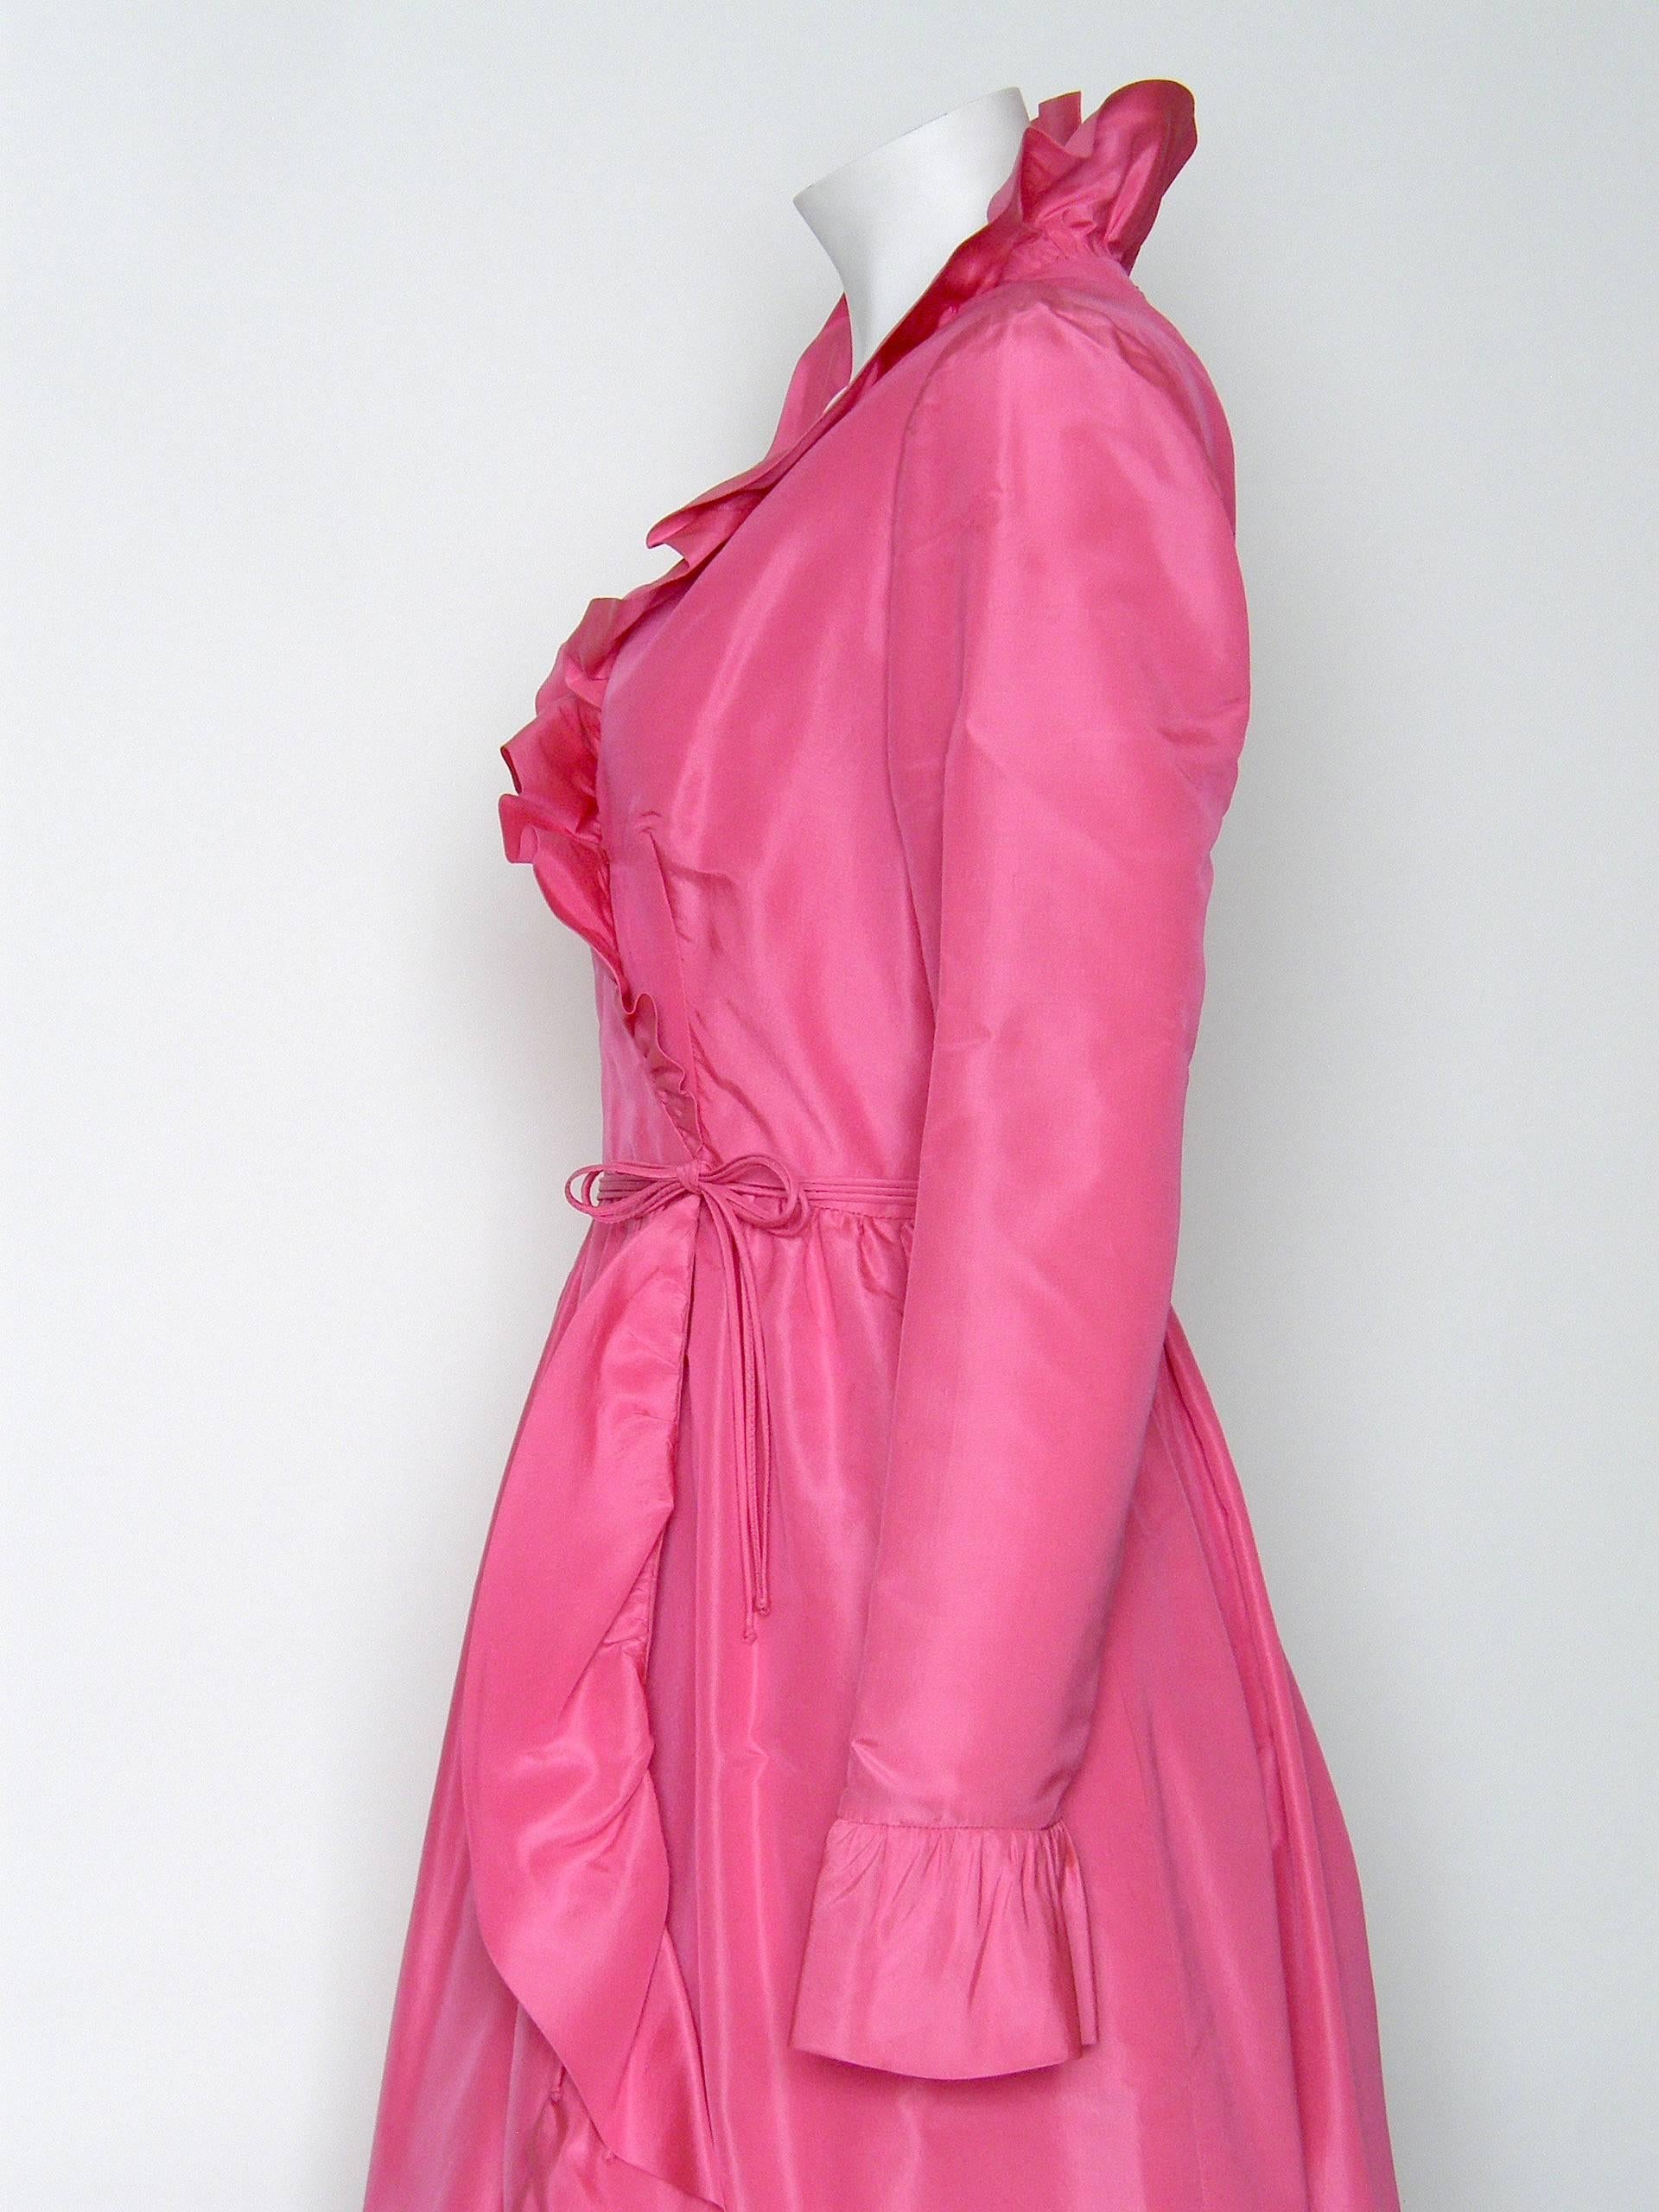 Mollie Parnis Pink Silk Gown Wrap Style with Ruffled Edges and Skirt Slit For Sale 1